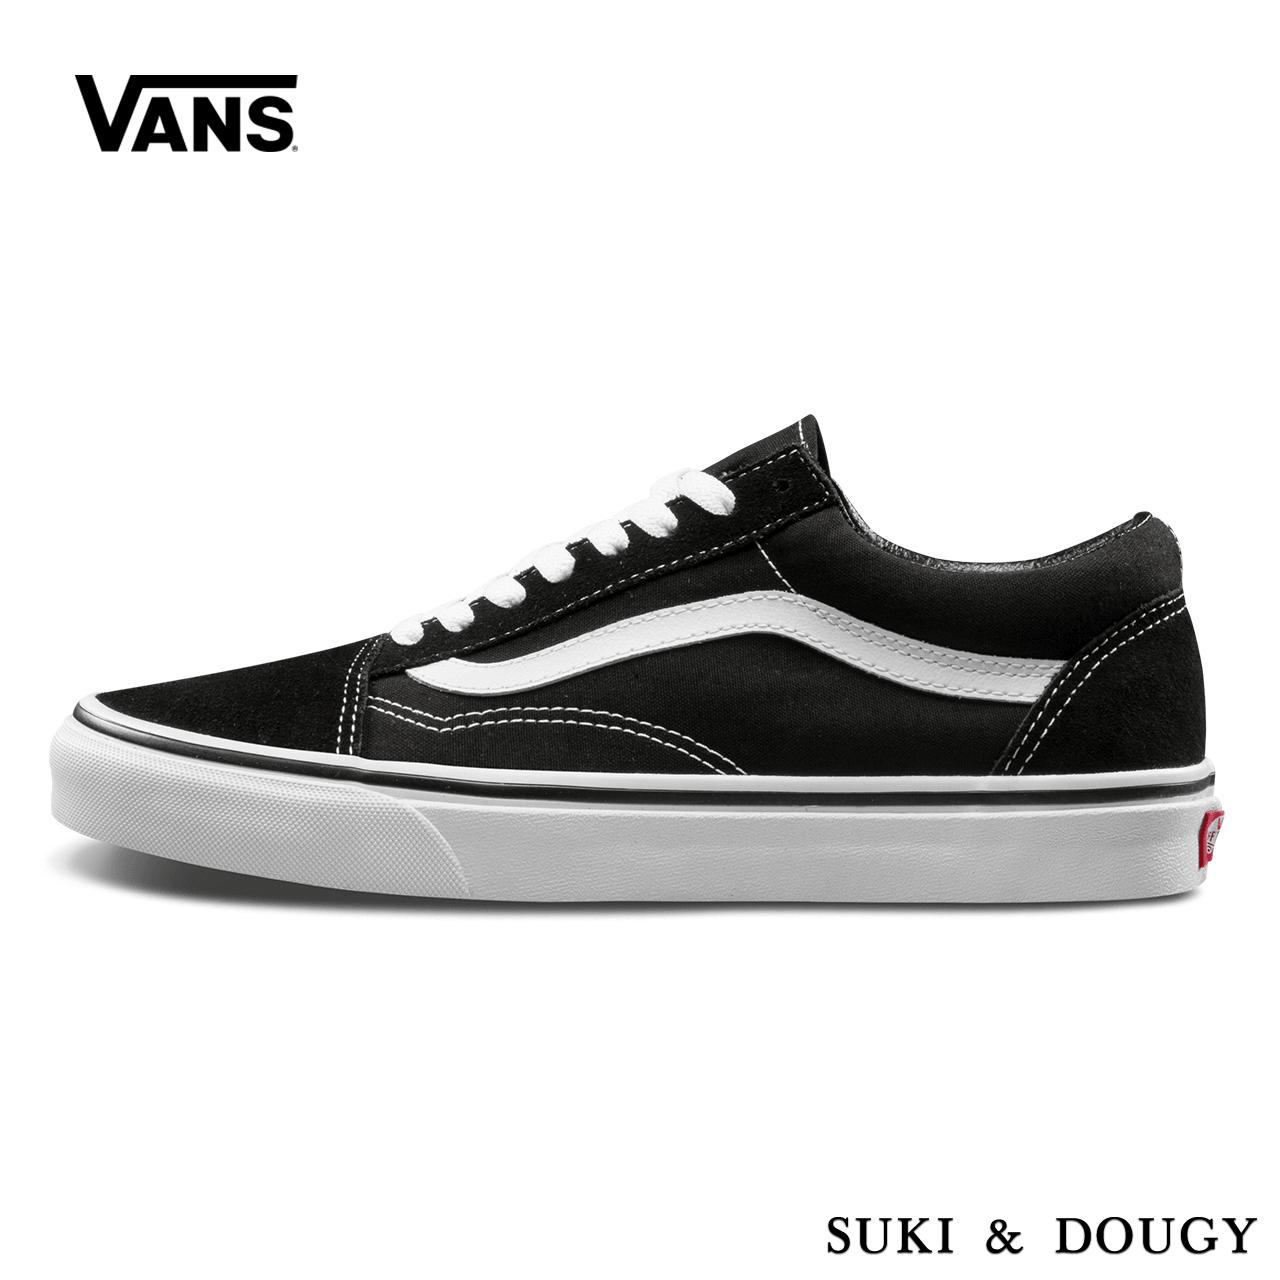 where to buy vans shoes online cheap online